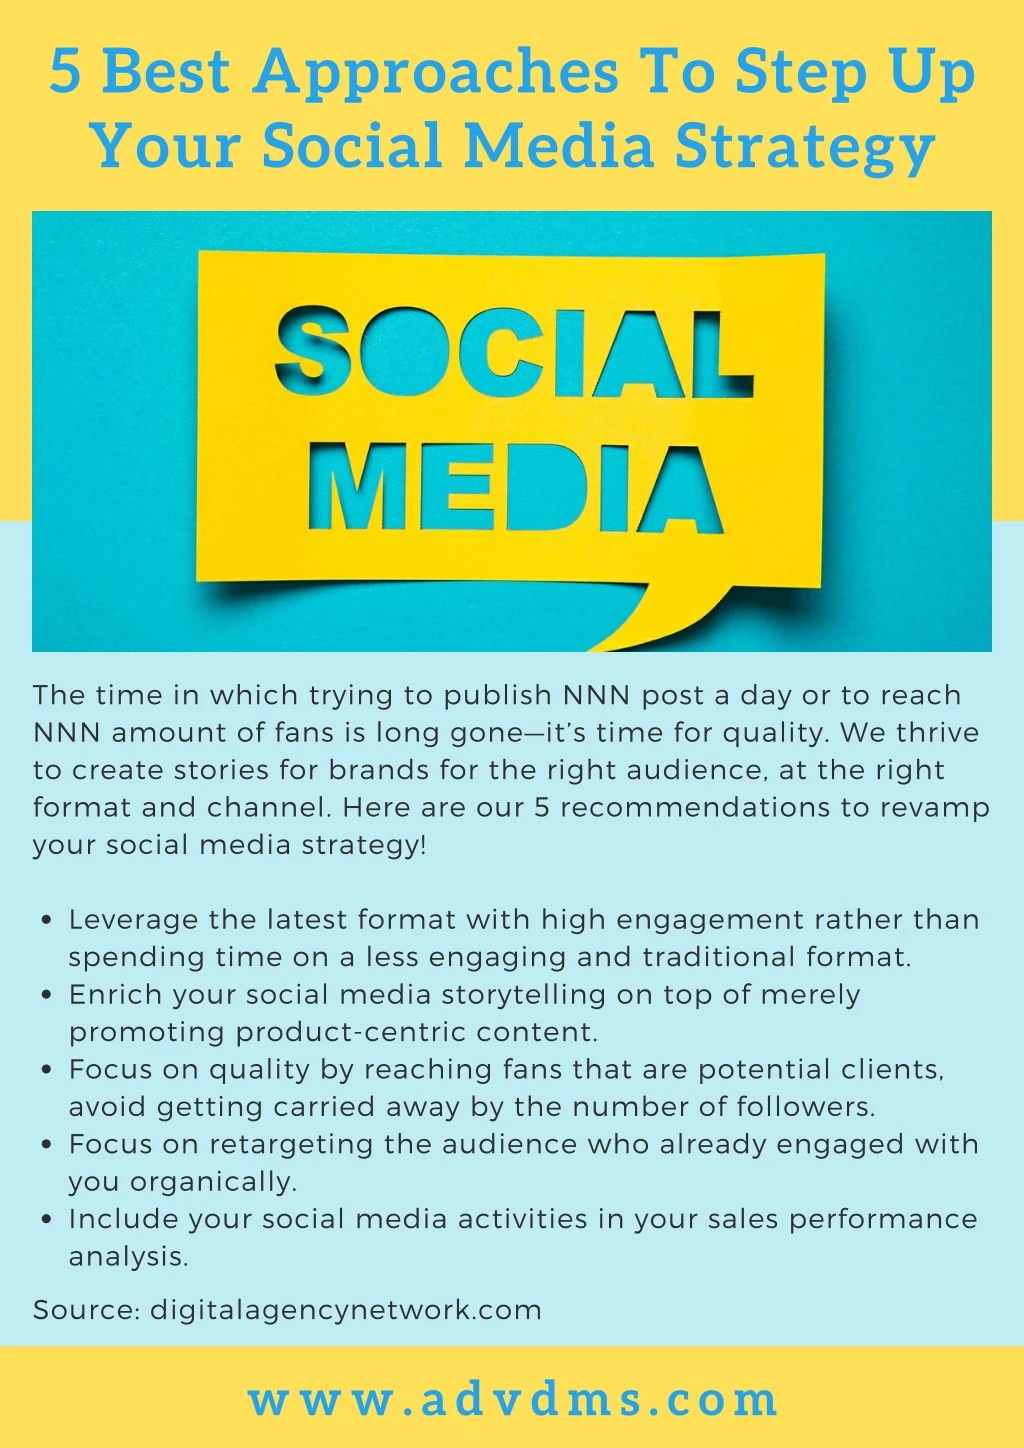 5 best approaches to step up your social media